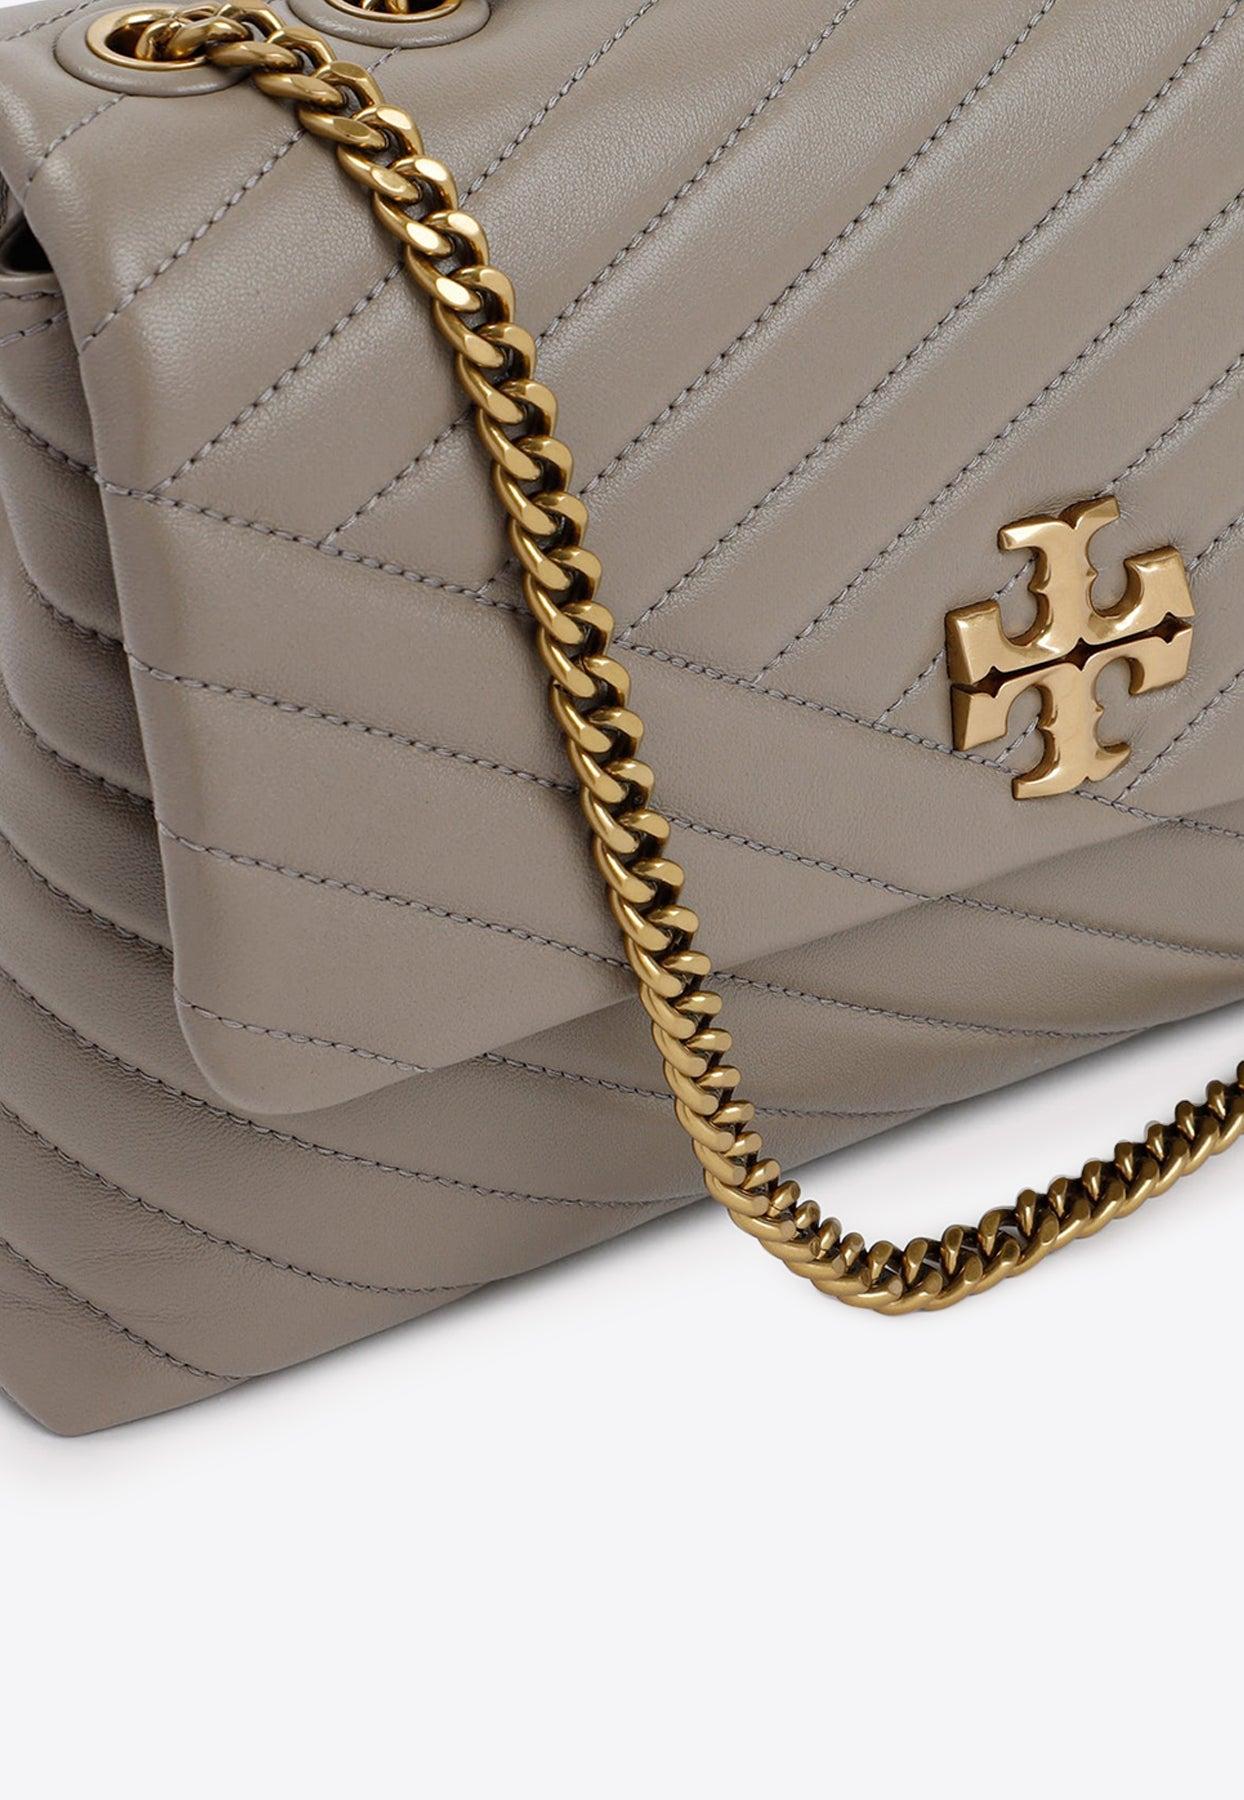 TORY BURCH: Kira shoulder bag in quilted chevron nappa leather - Black